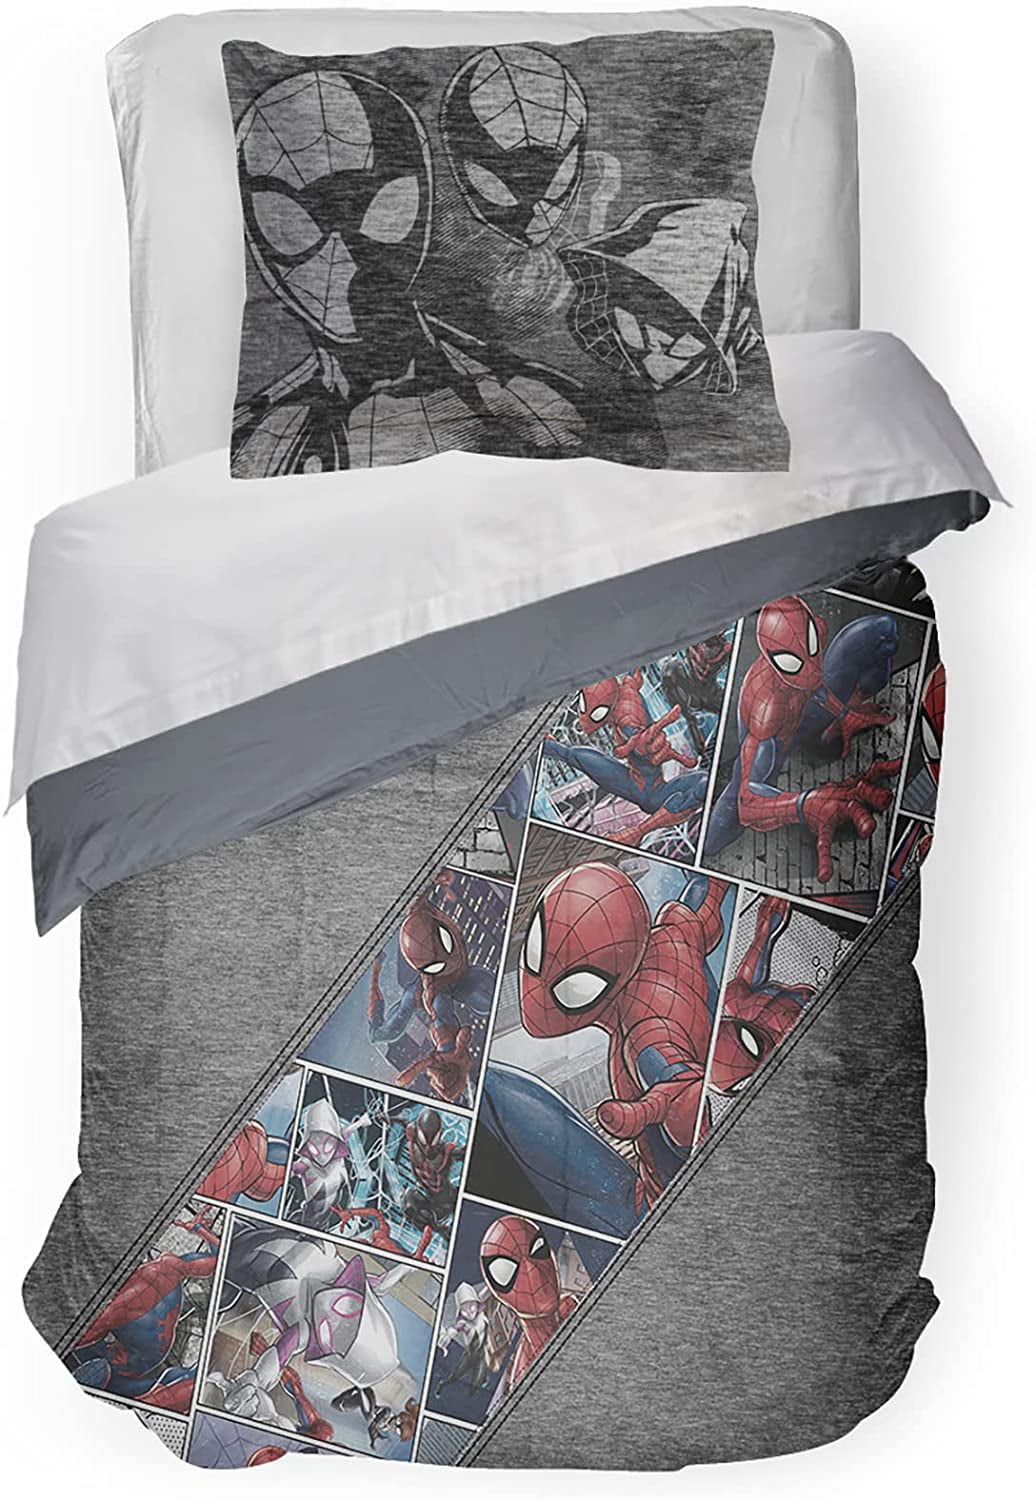 Super Soft Kids Reversible Bedding Fade Resistant Polyester Microfiber Fill Jay Franco Marvel Spiderman Spidey Crawl Twin Comforter Official Marvel Product 